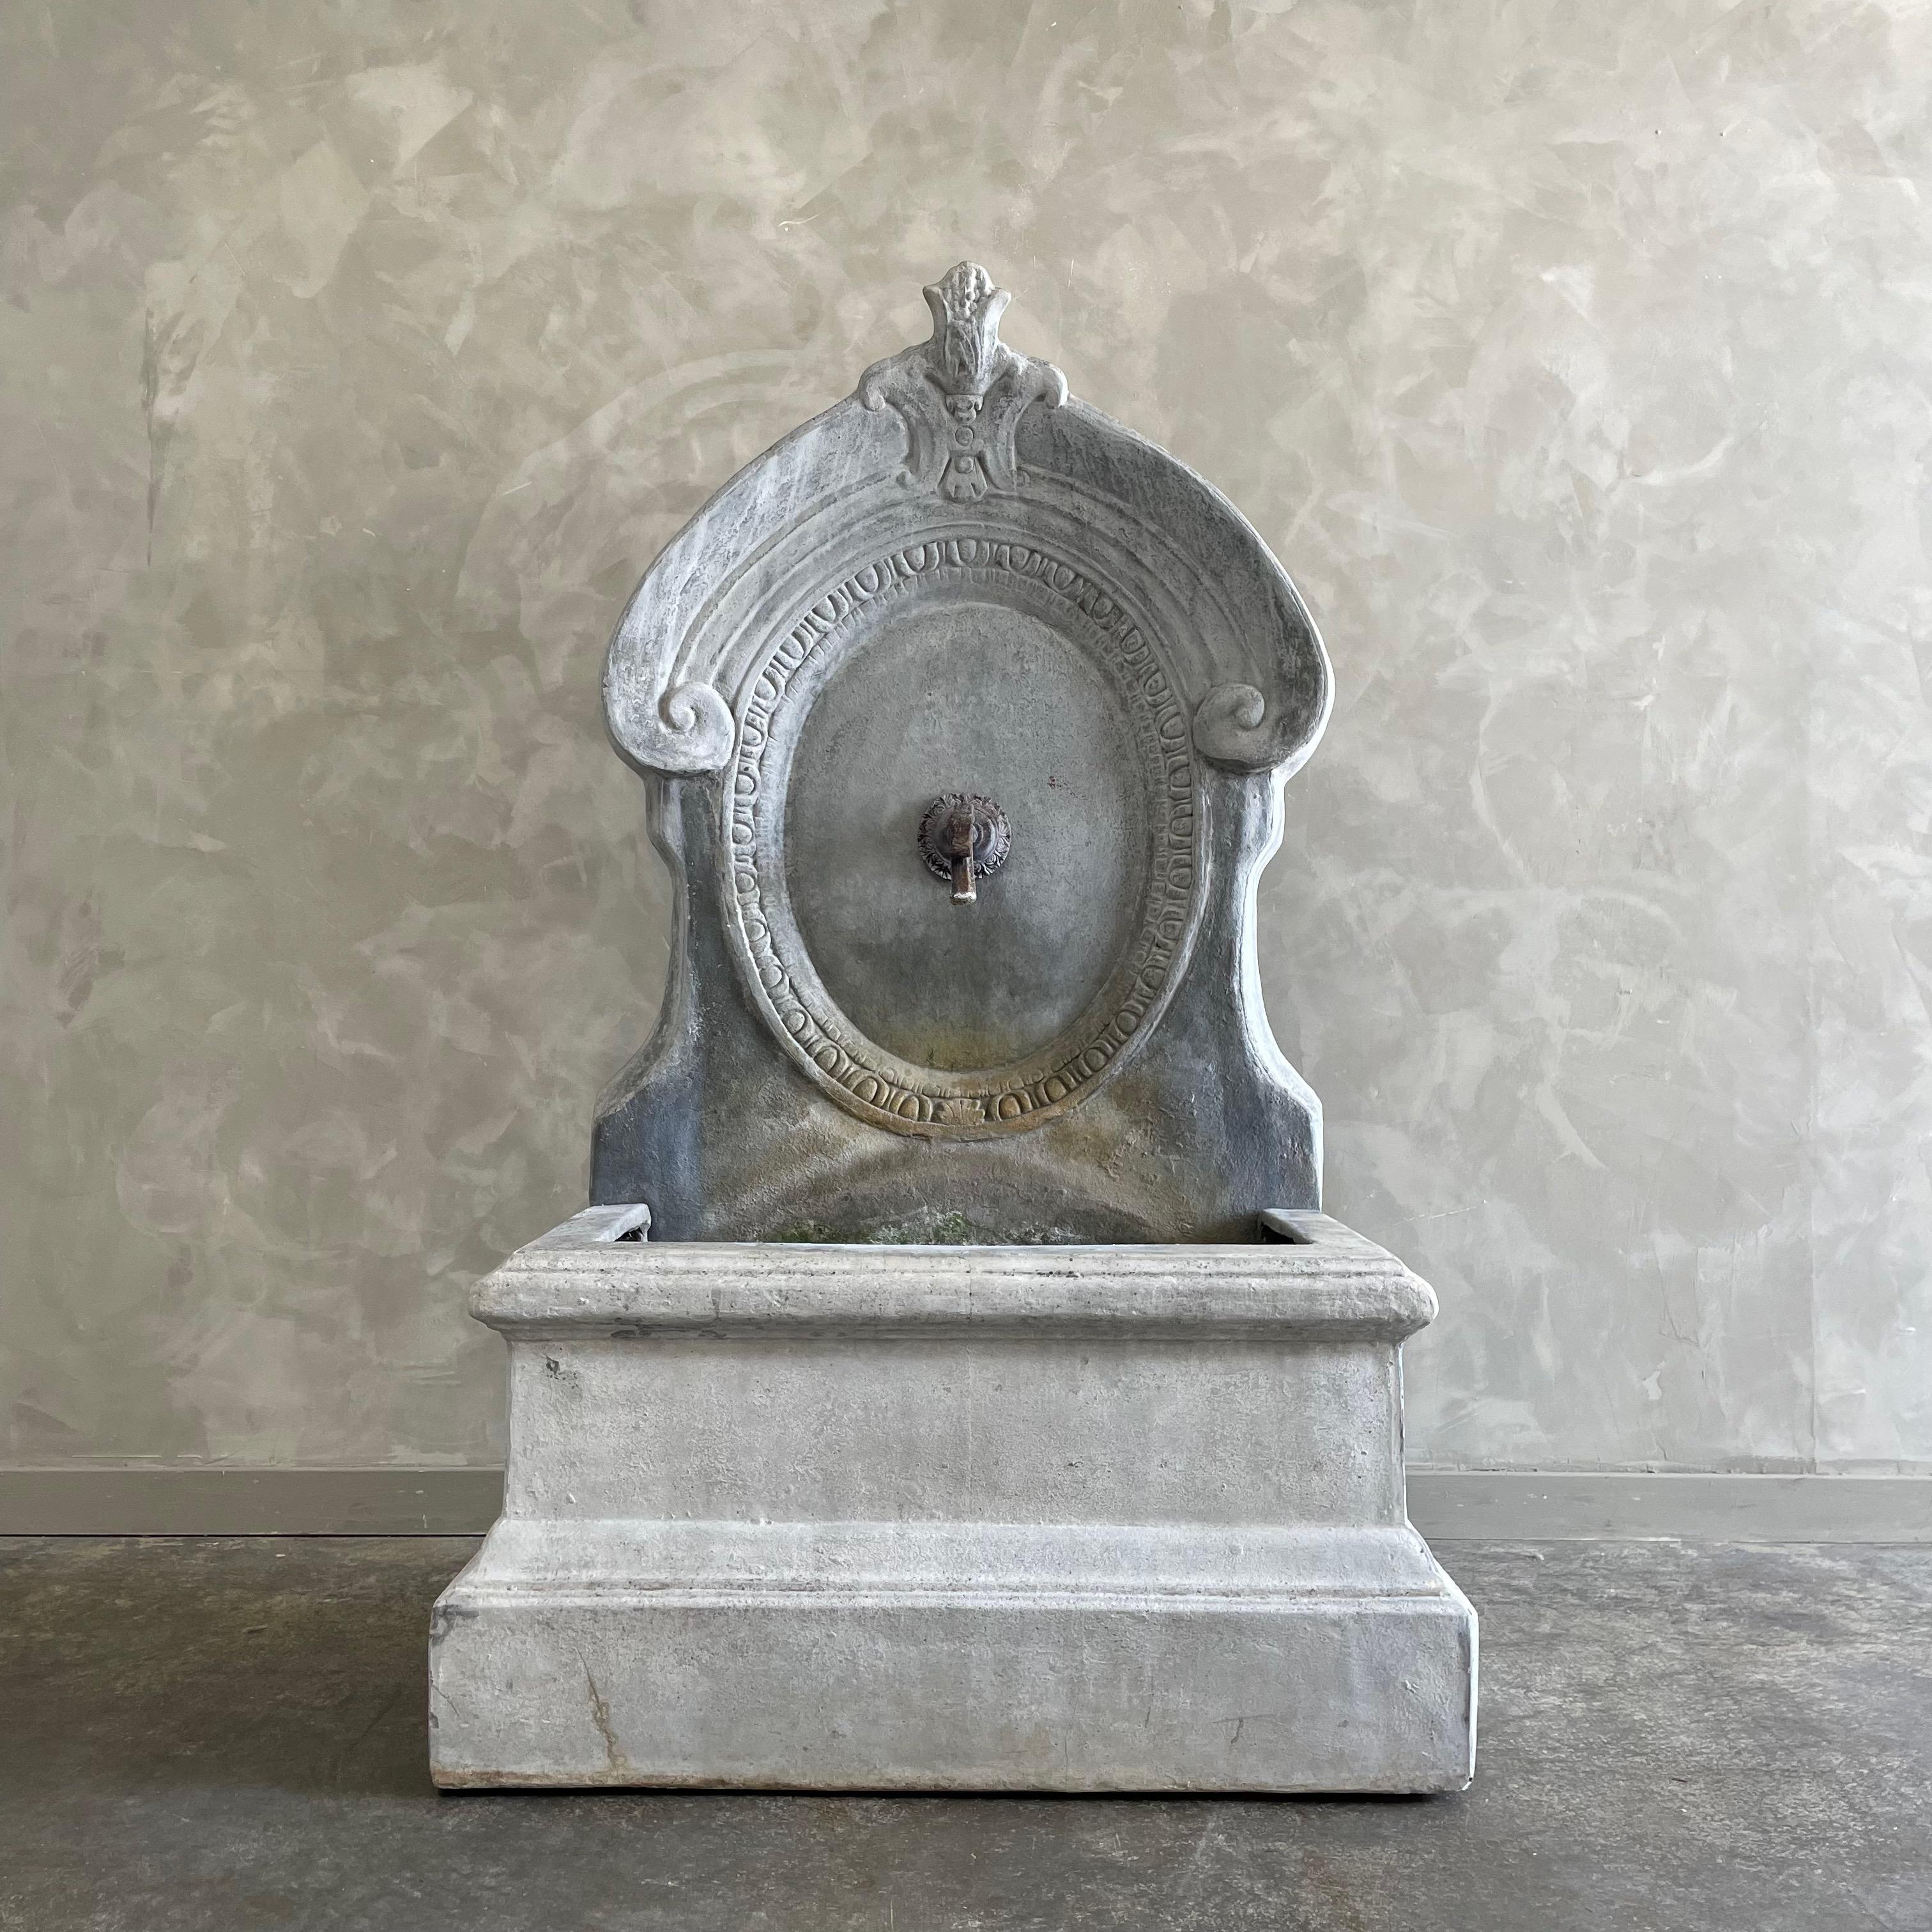 Vintage rustic outdoor garden fountain inspired by french sculpting and minimalist craftsmanship. Cast stone and fiberglass fountain and iron spout spews water with a serene white noise.